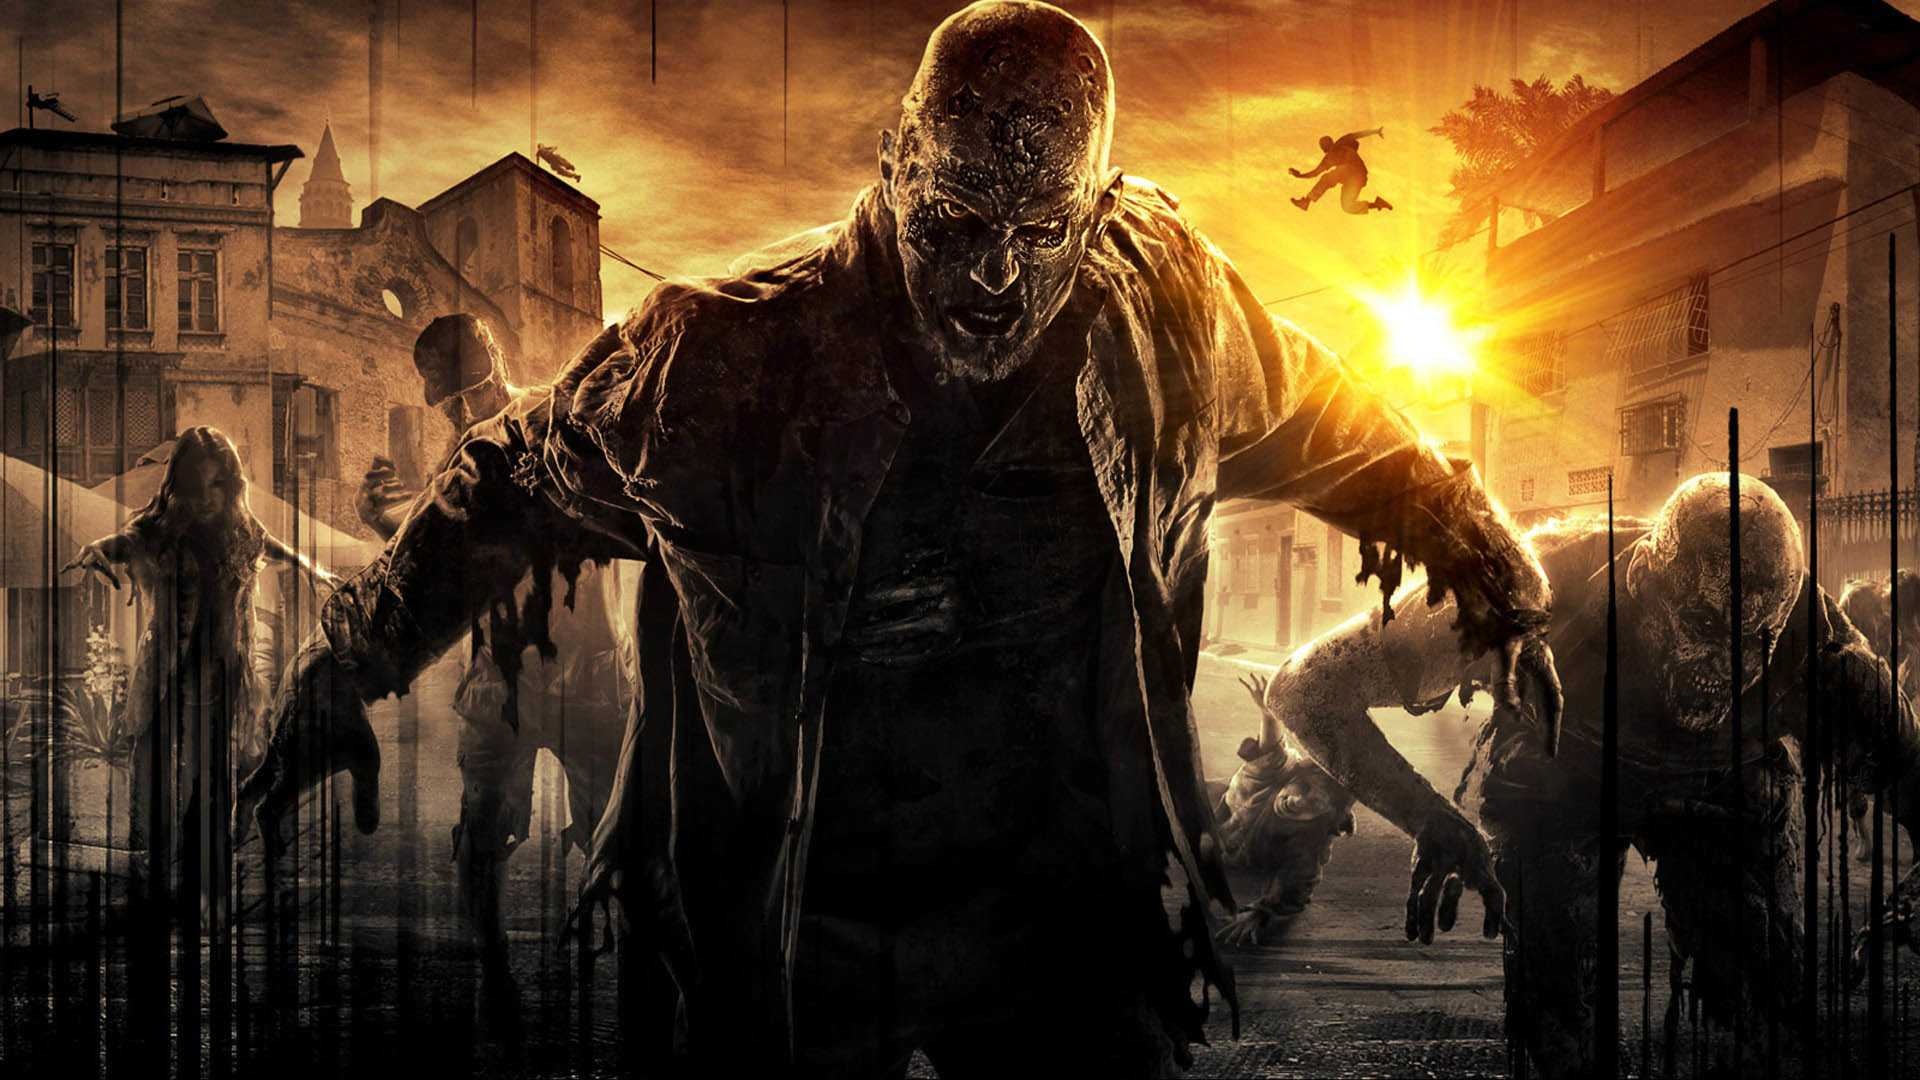 Cool zombie wallpapers, Stylish undead, Trending backgrounds, Spooky visuals, 1920x1080 Full HD Desktop